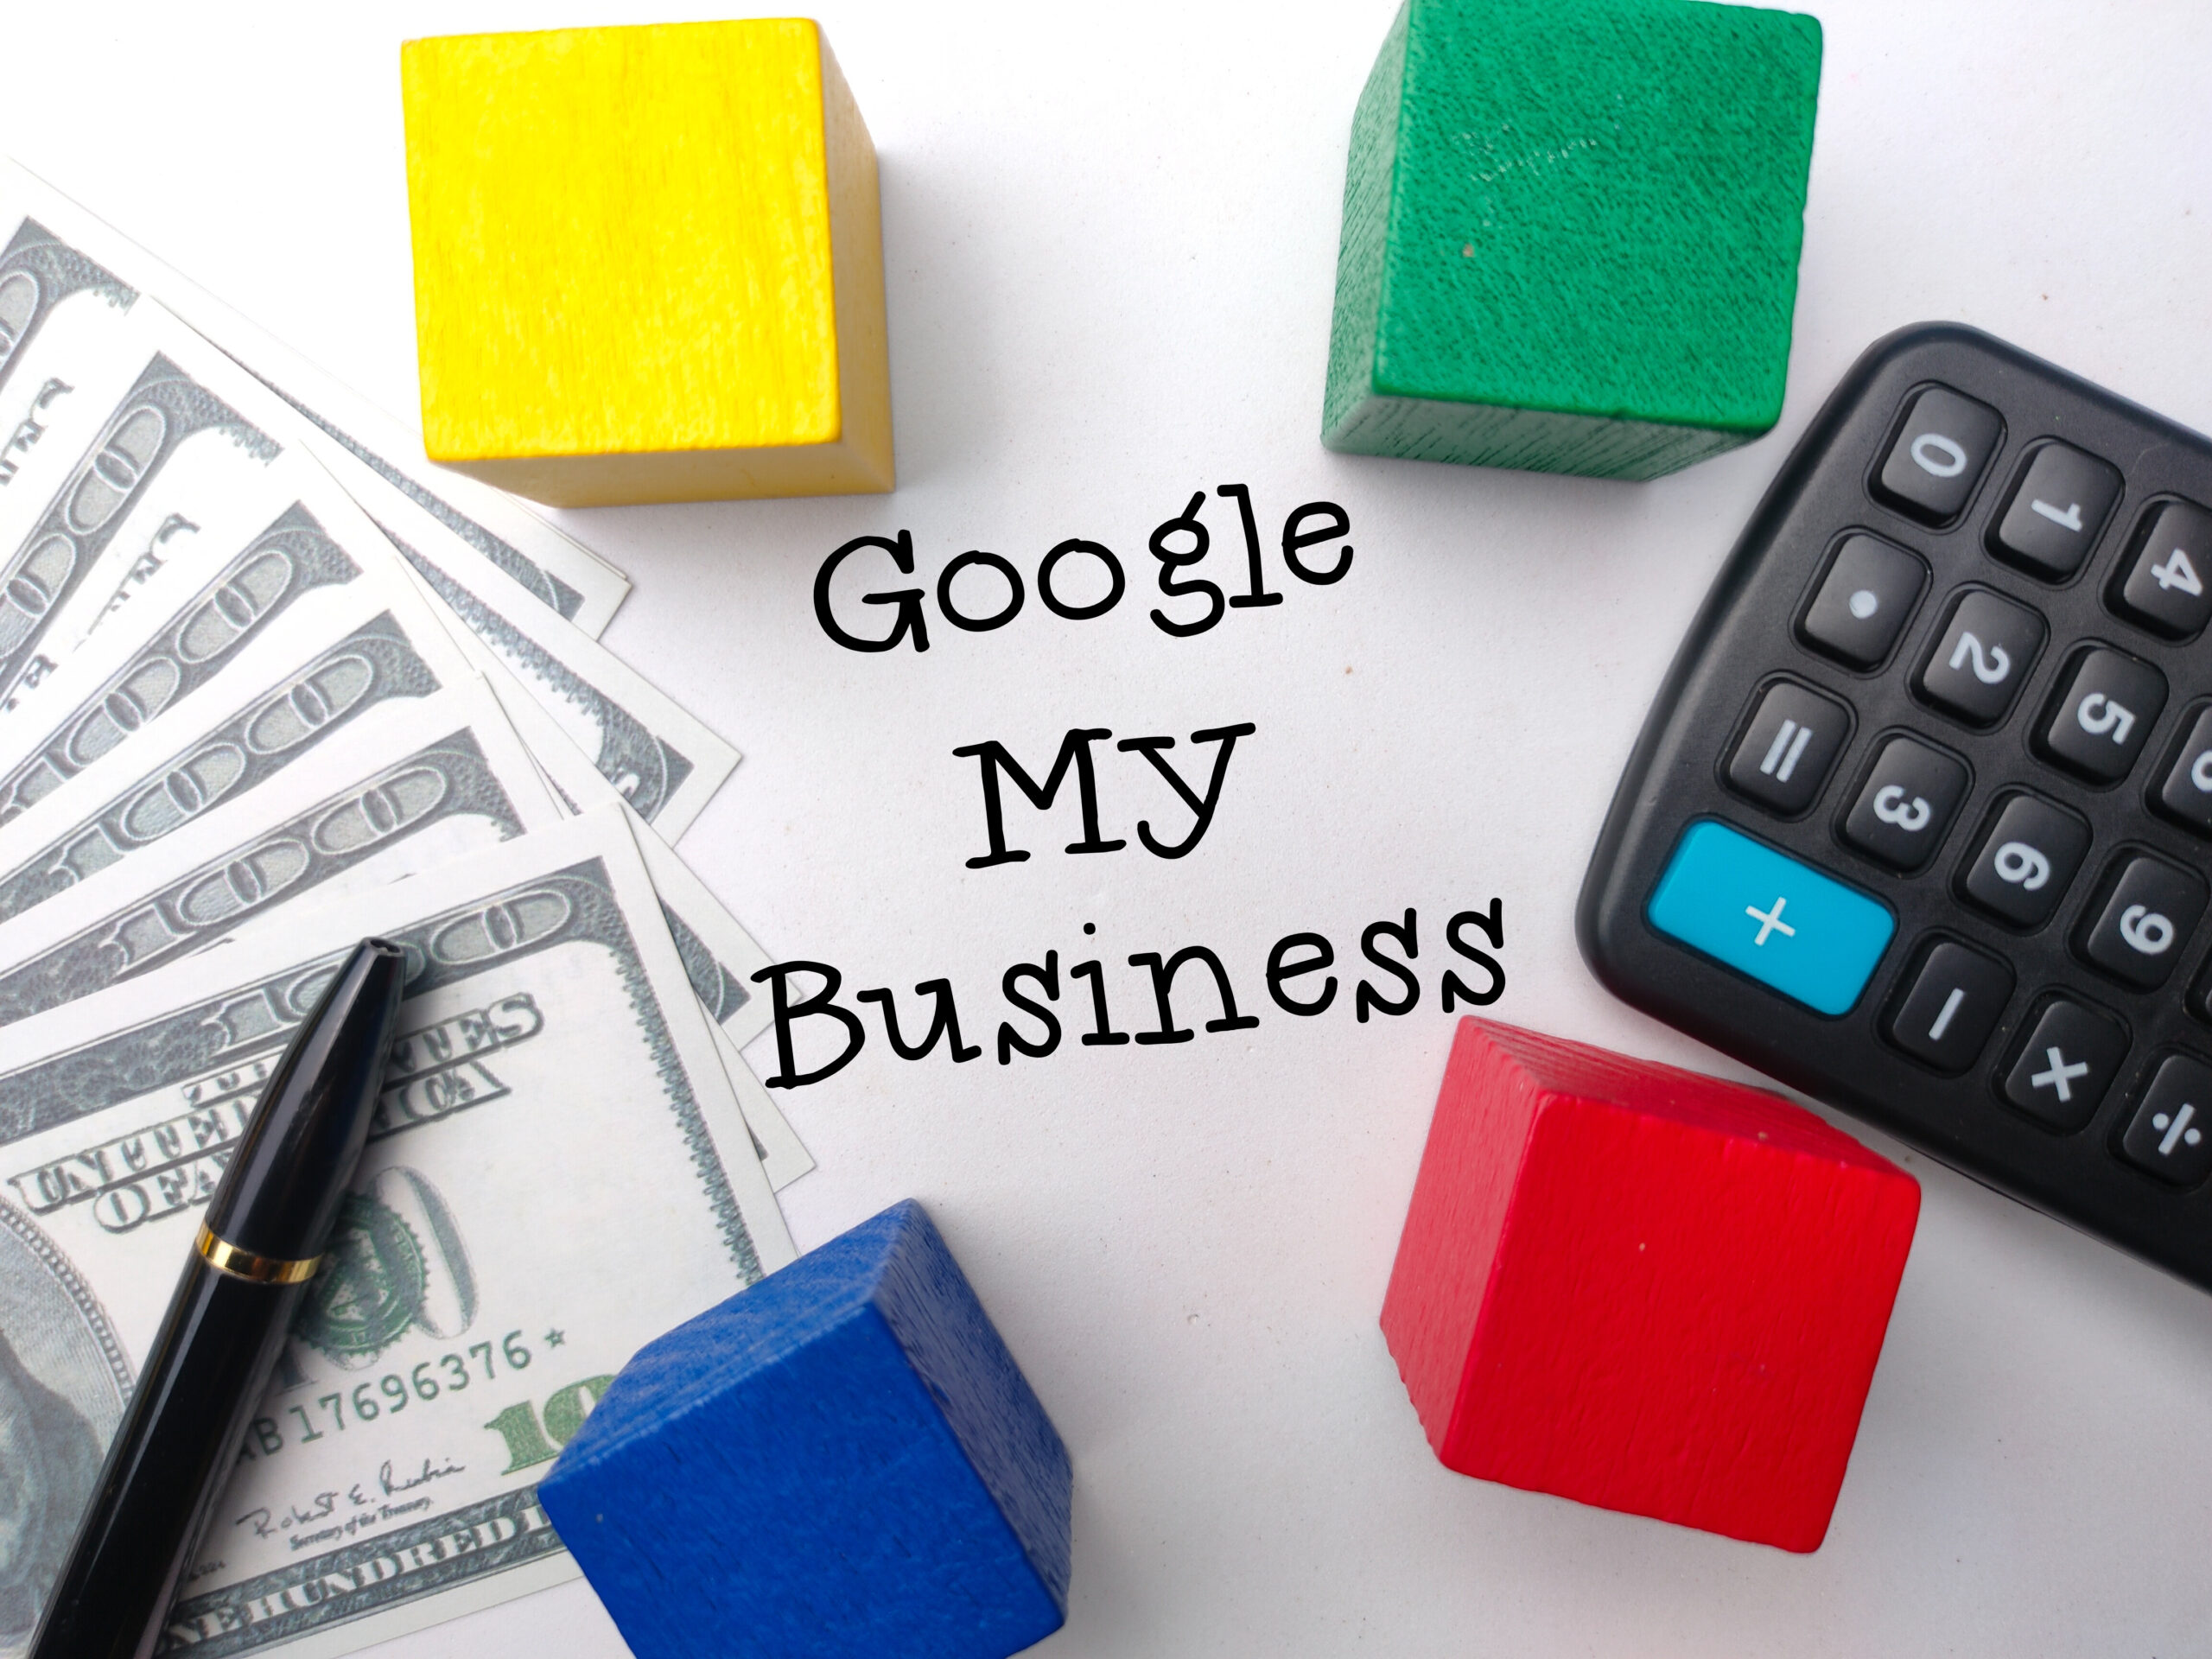 How to Add Your Business to Google Maps for Free